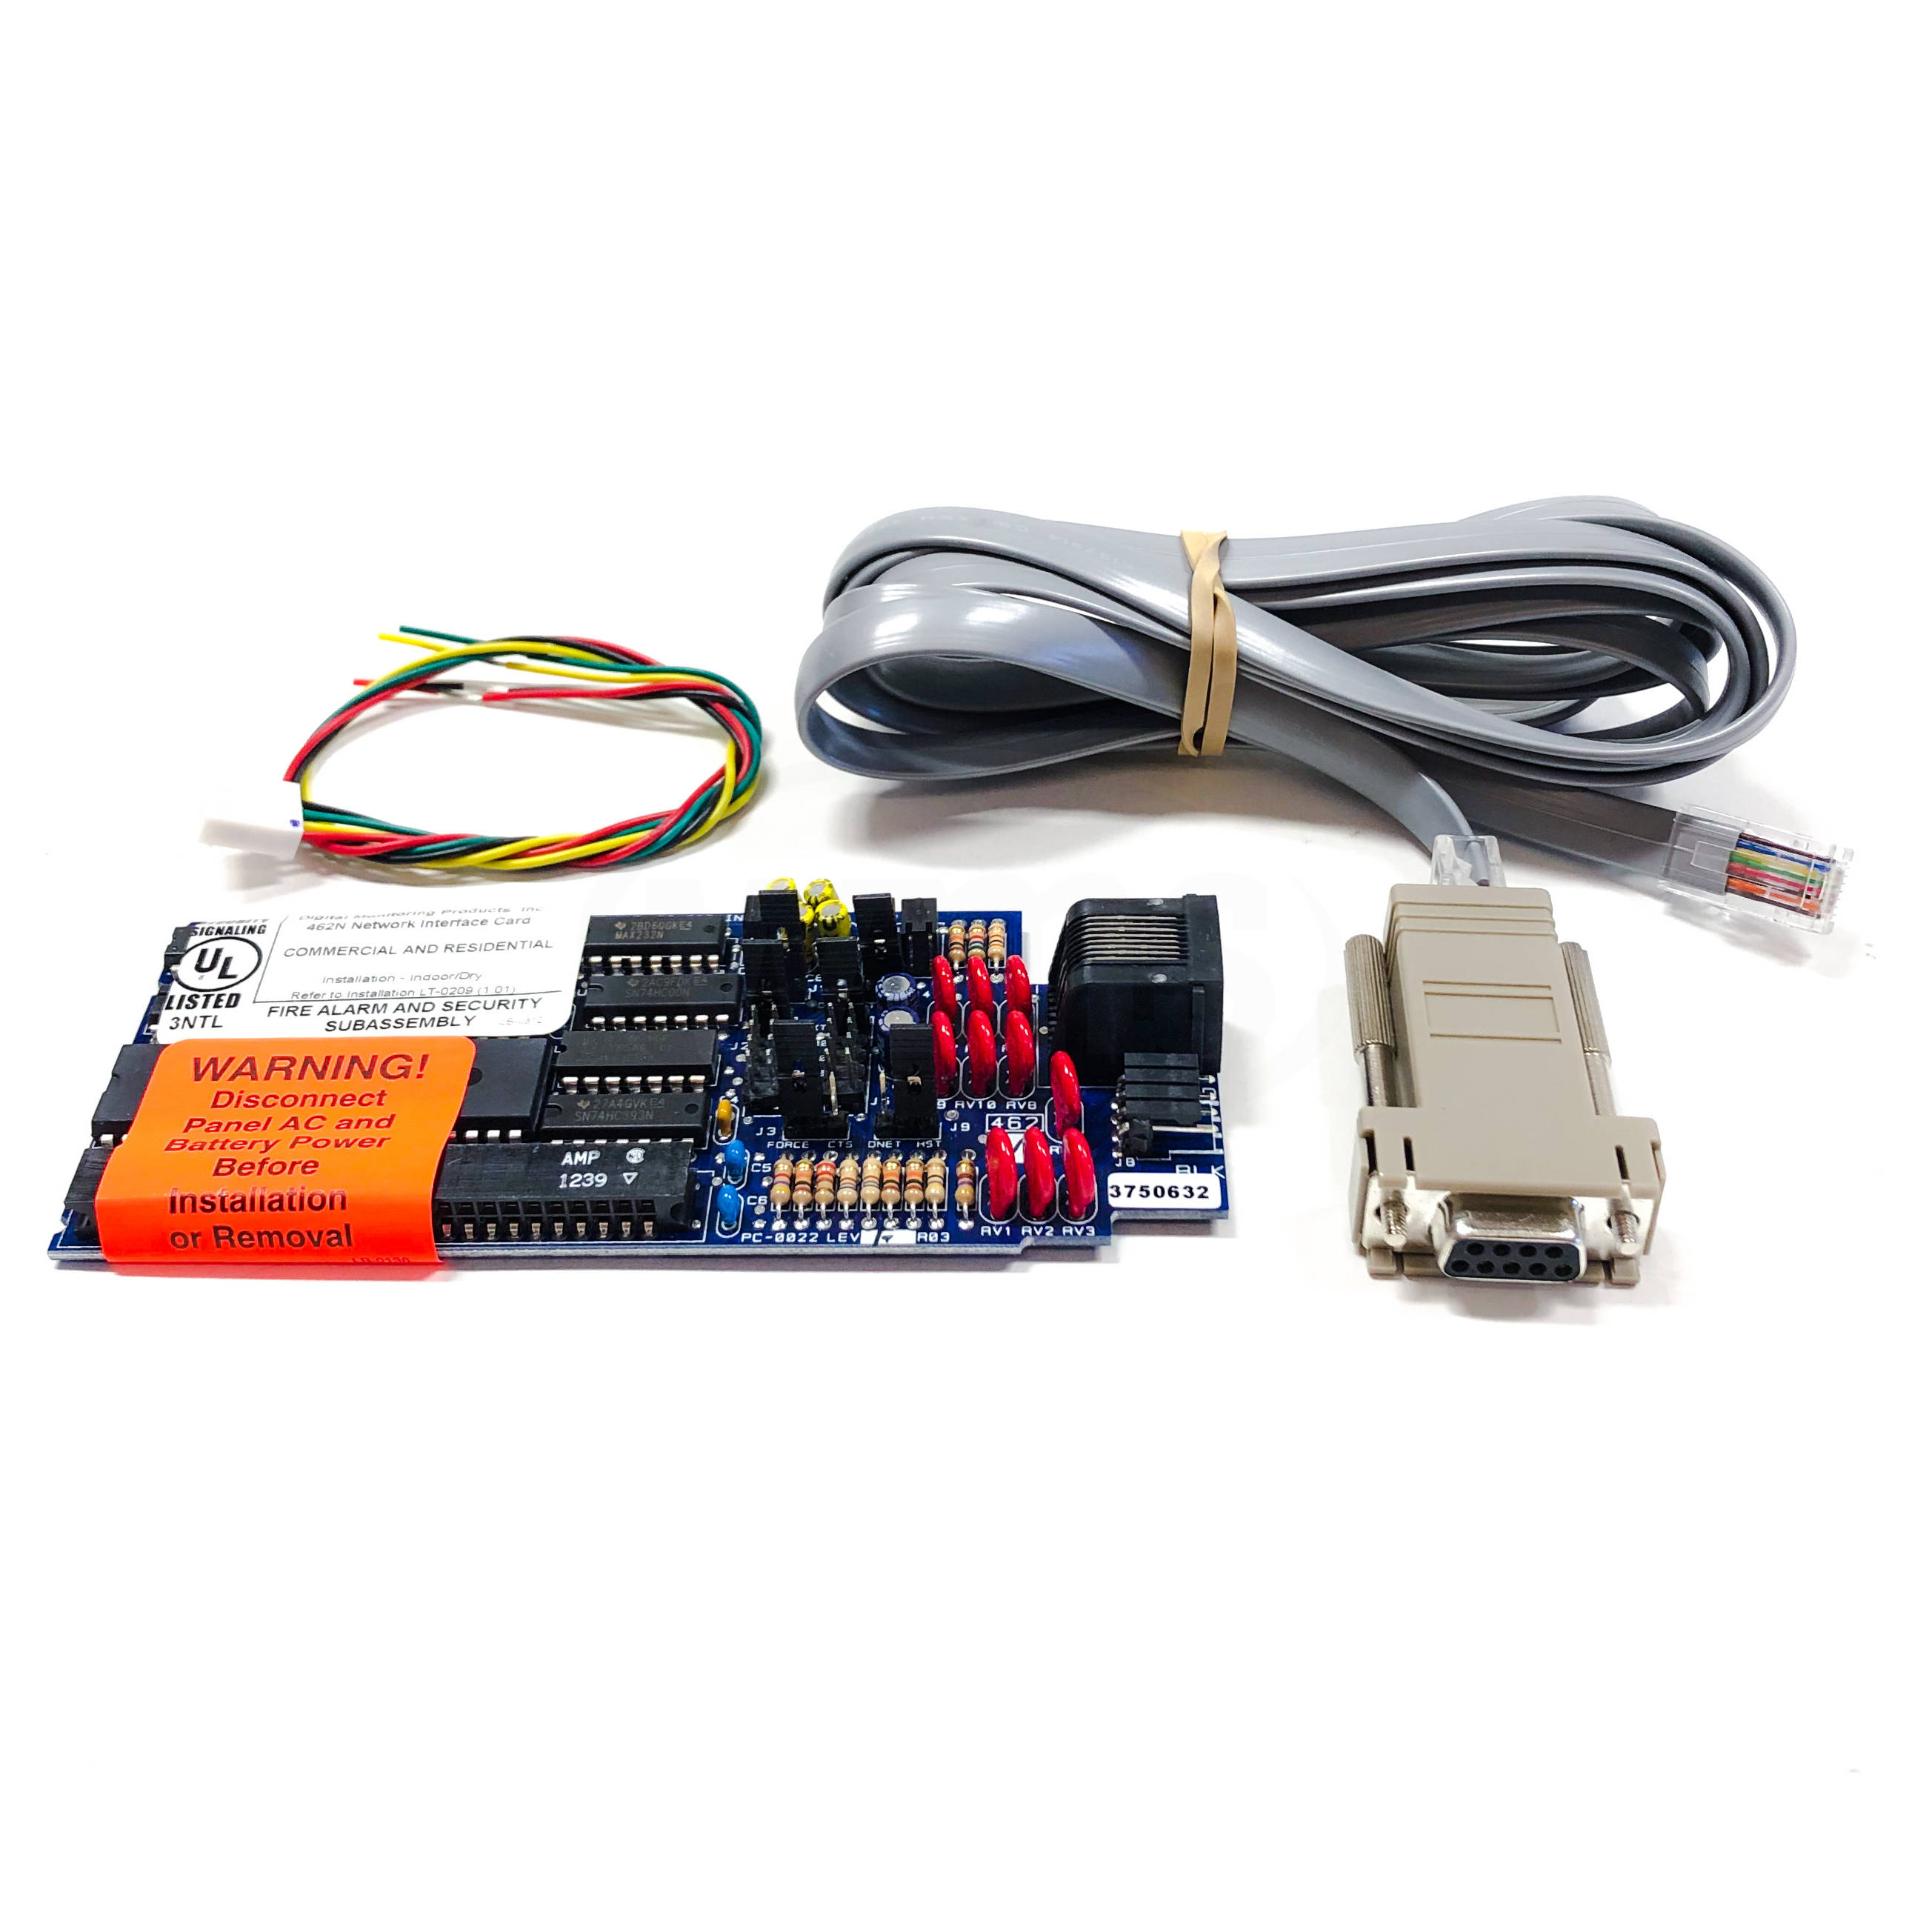 462N-DC Digital Monitoring Products Network Interface Card 1